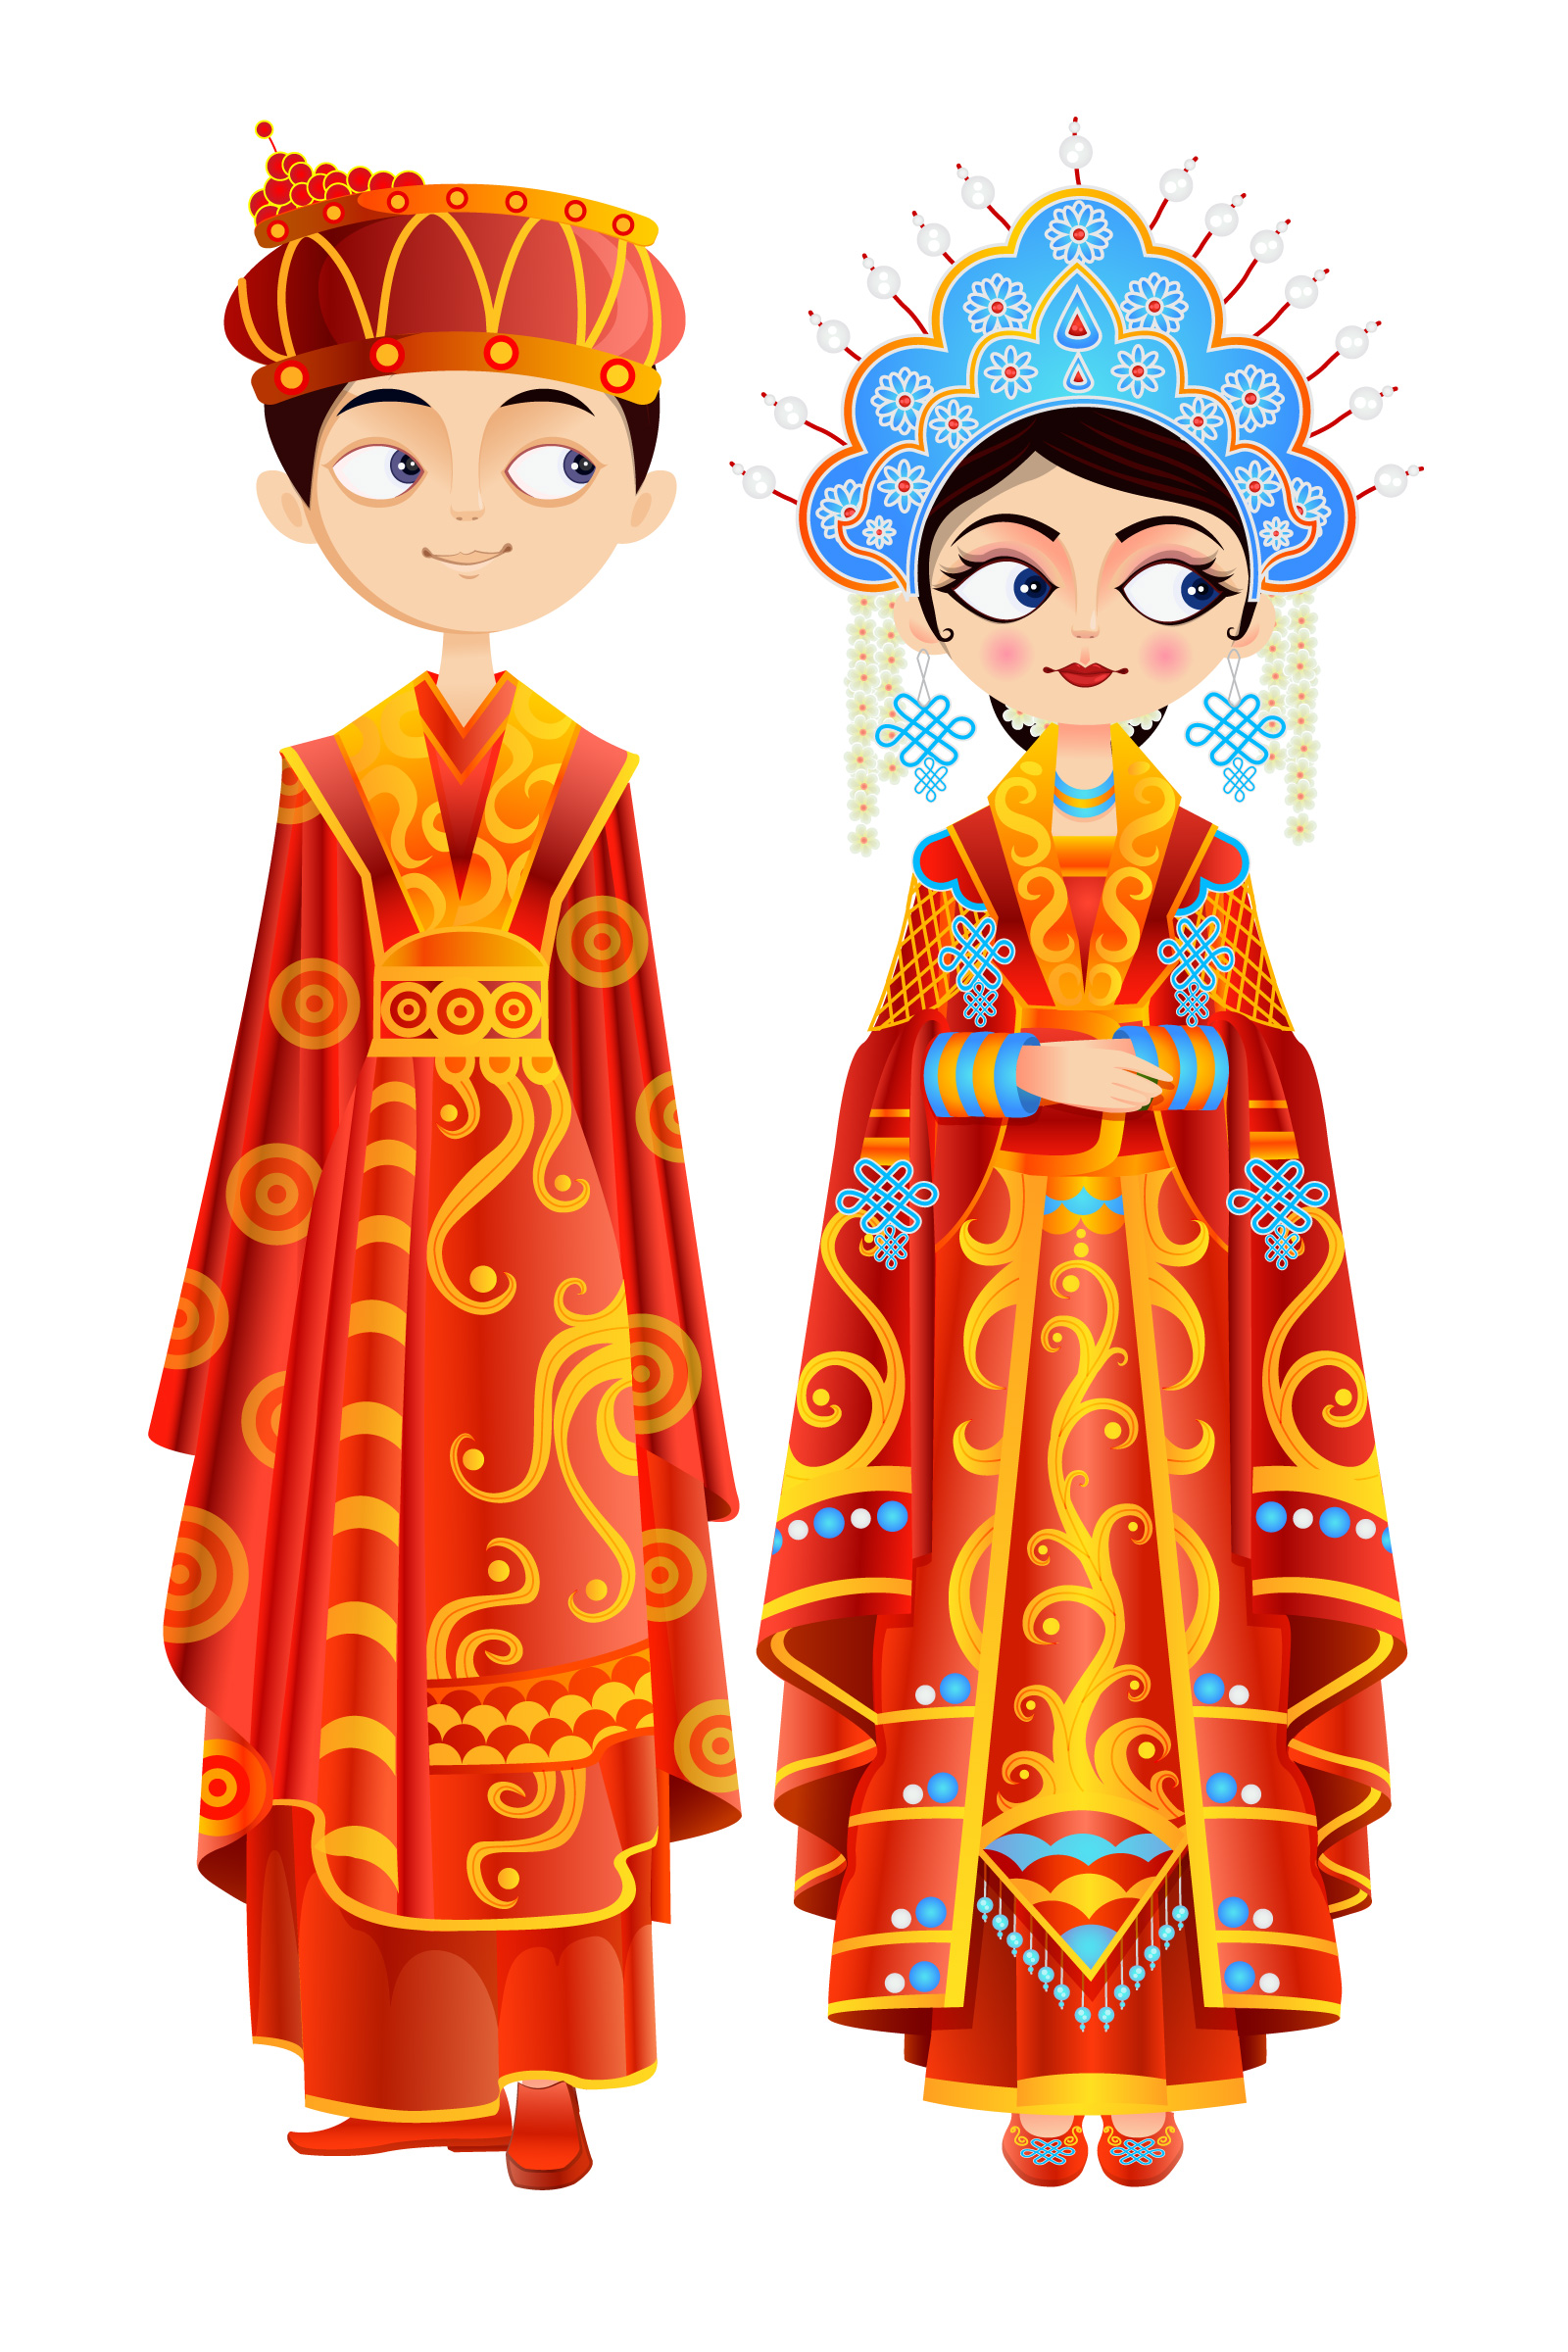 The traditional Chinese wedding ceremony the bride and groom cartoon image Illustrations Vectors AI ESP